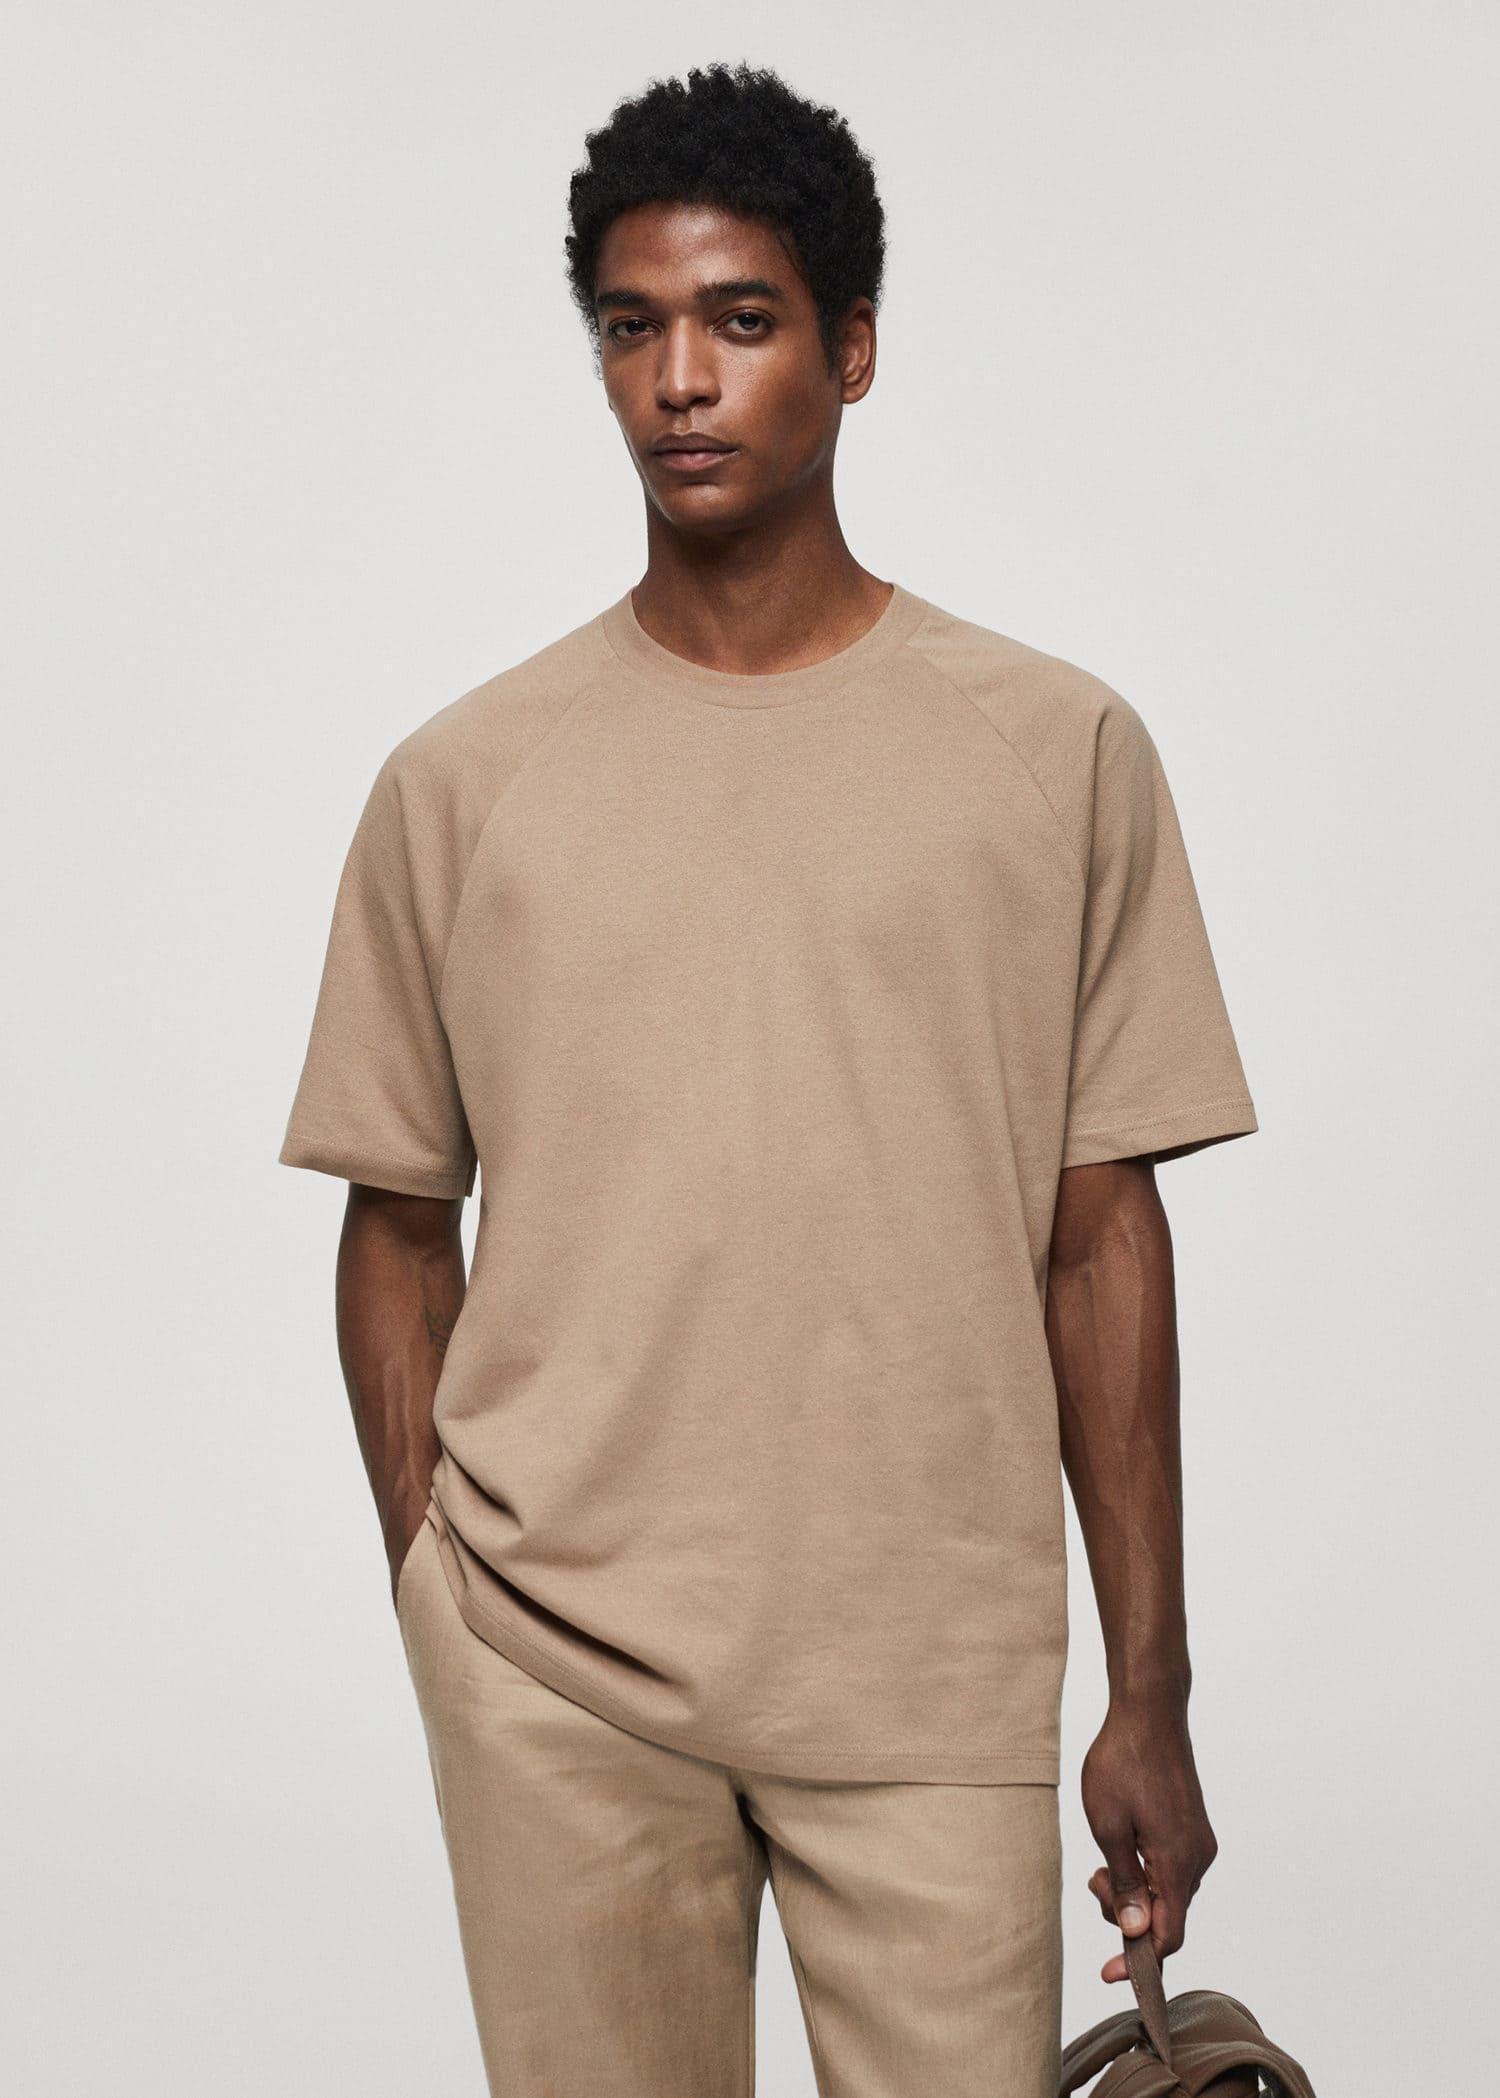 Mango - Beige Relaxed Fit Cotton T-Shirt